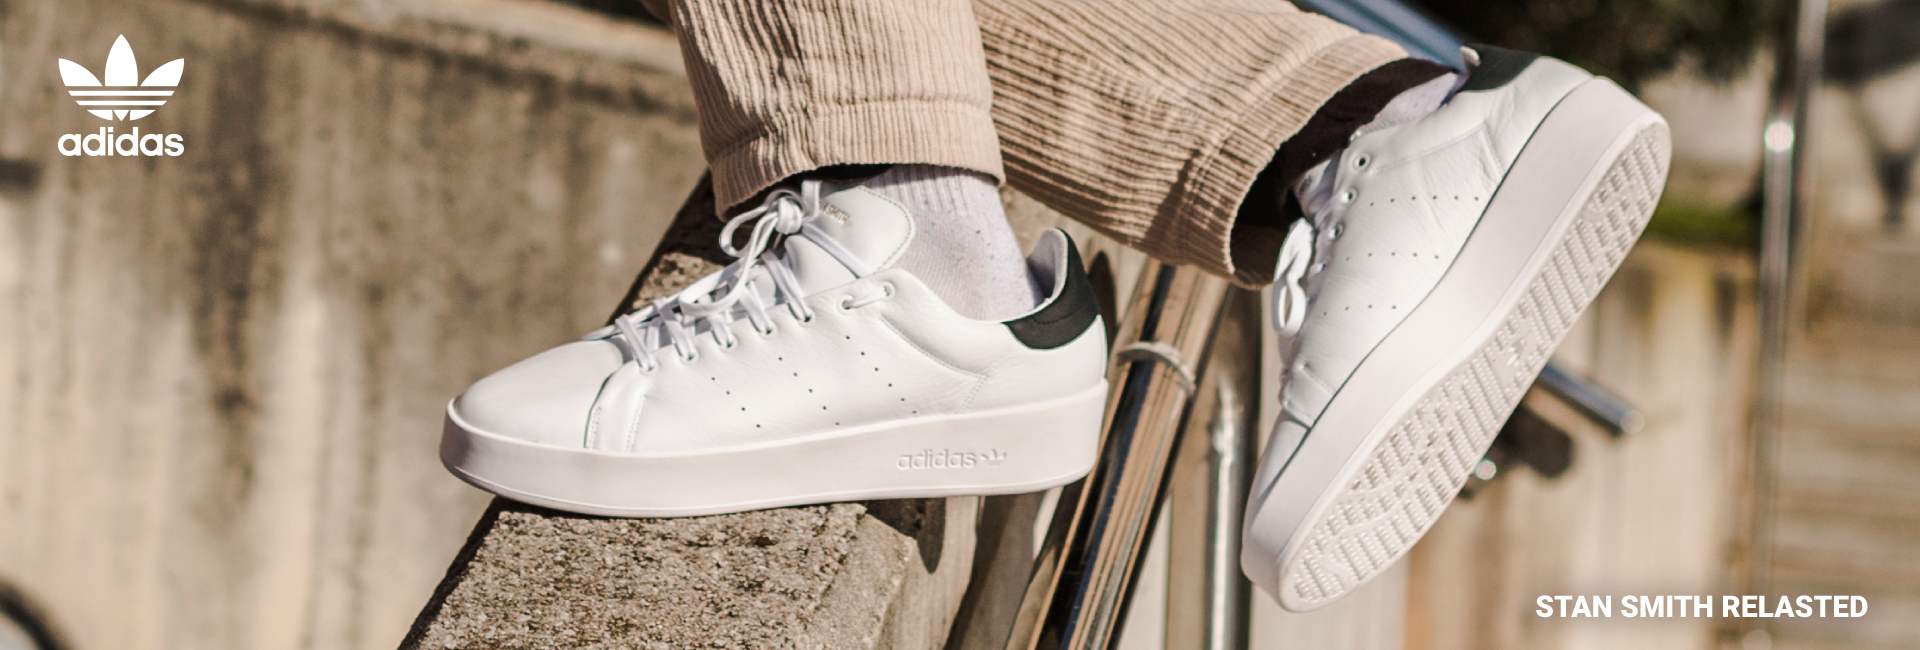 adidas Stan Smith Relasted